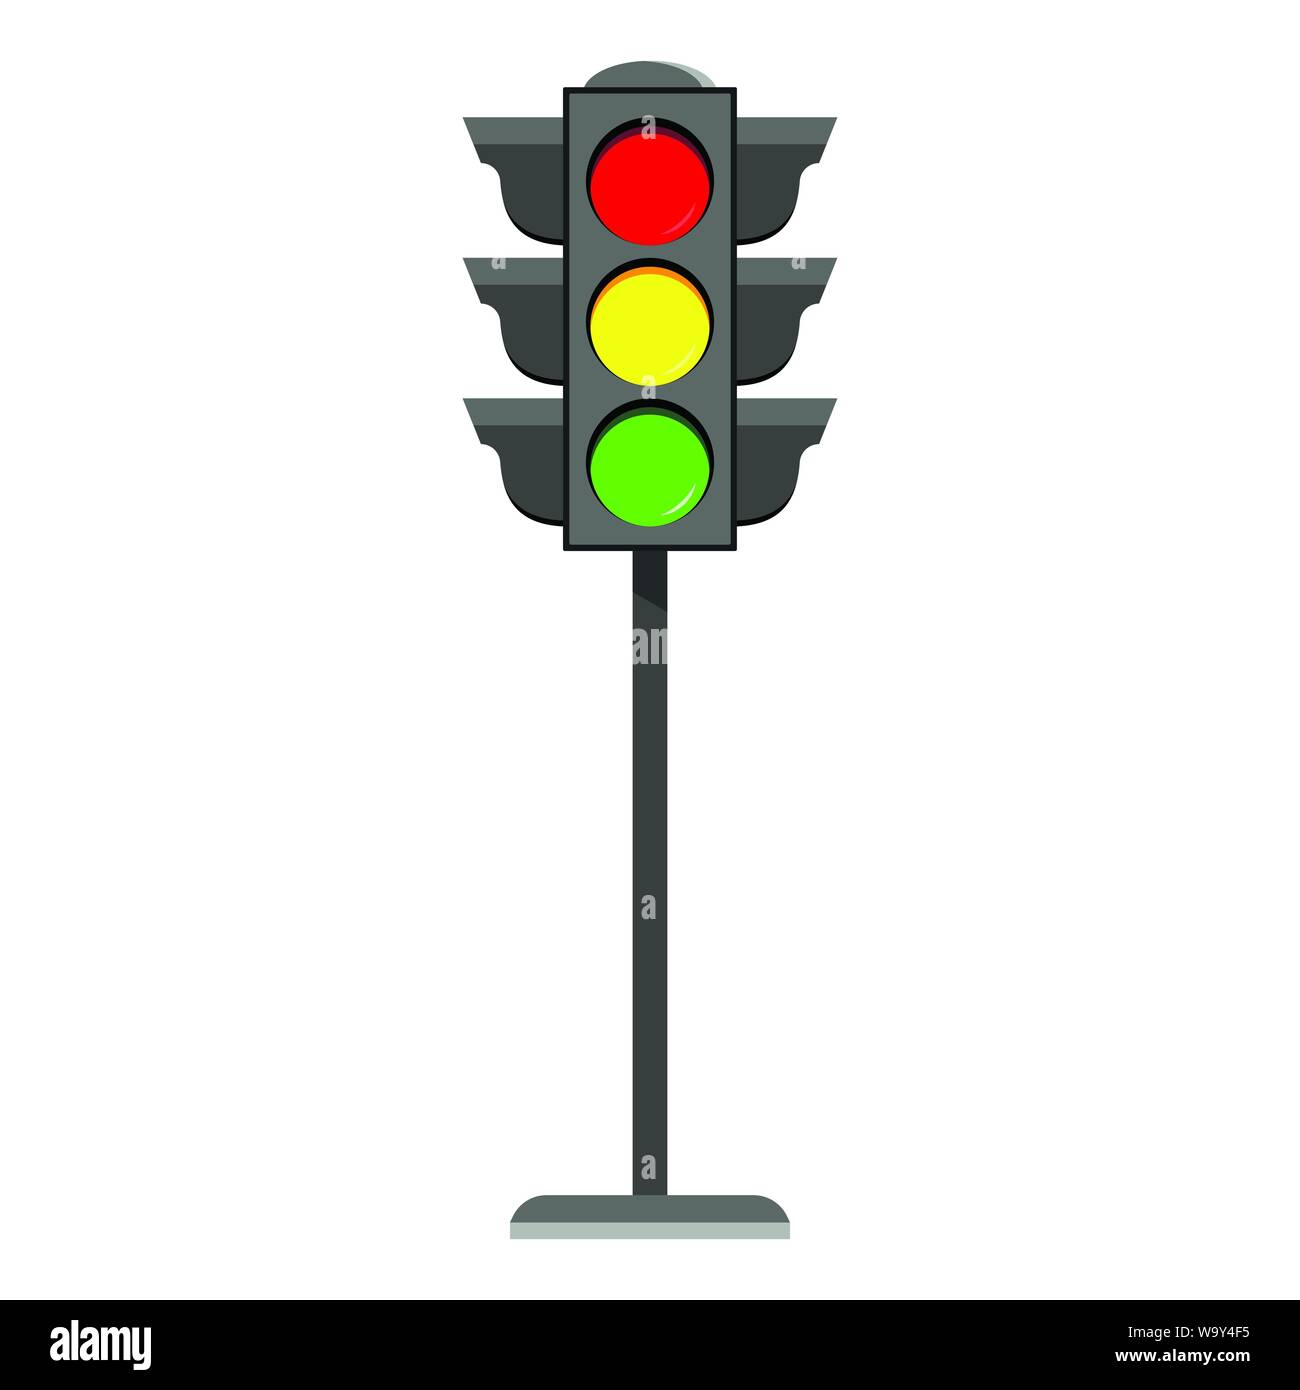 Standing traffic light flat design icon Typical horizontal traffic signals with red, yellow and green light. Stock Vector